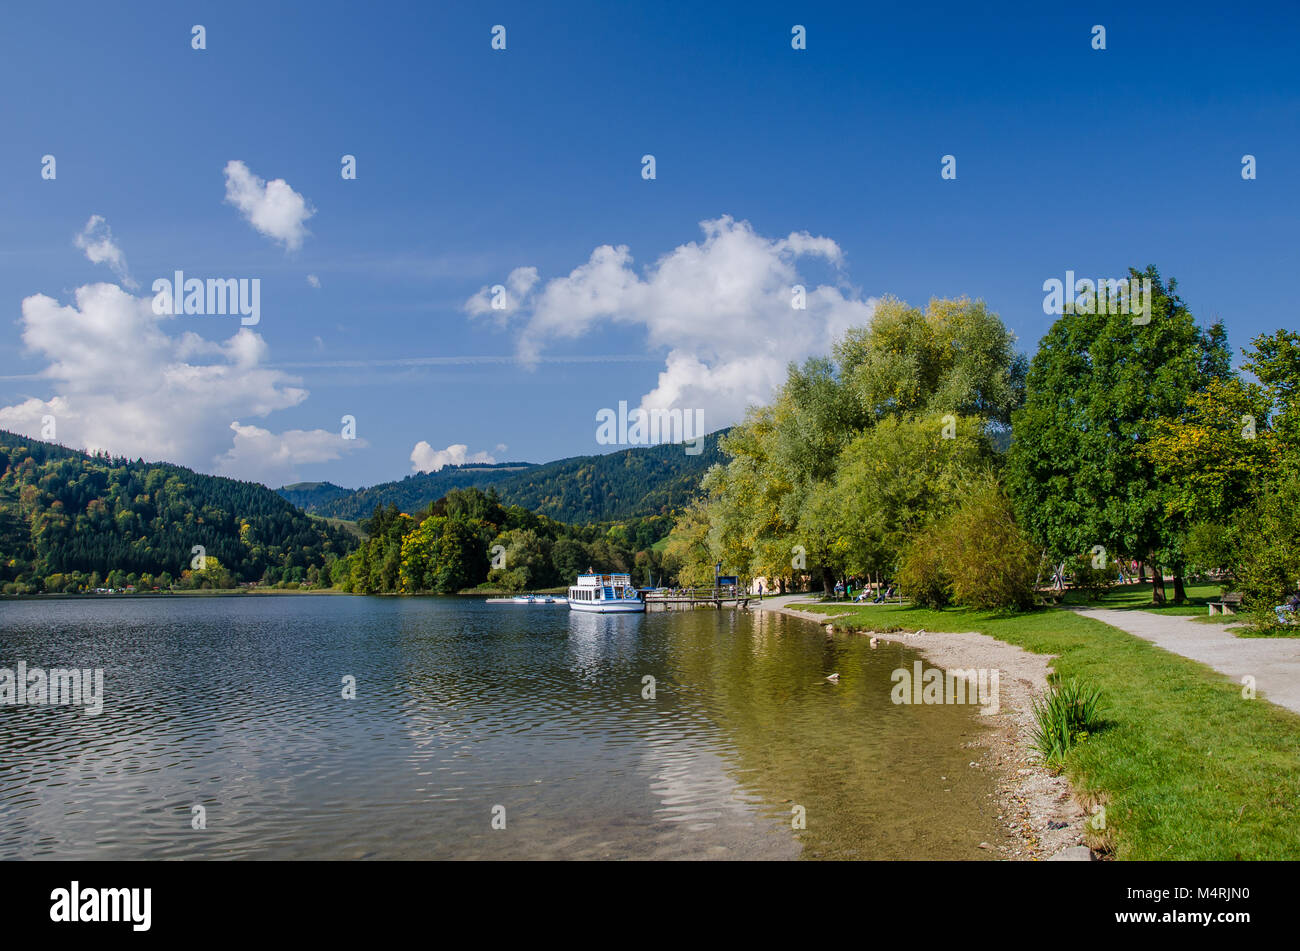 At Schliersee, one can explore the lake from a boat, which is great fun in summer. Stock Photo